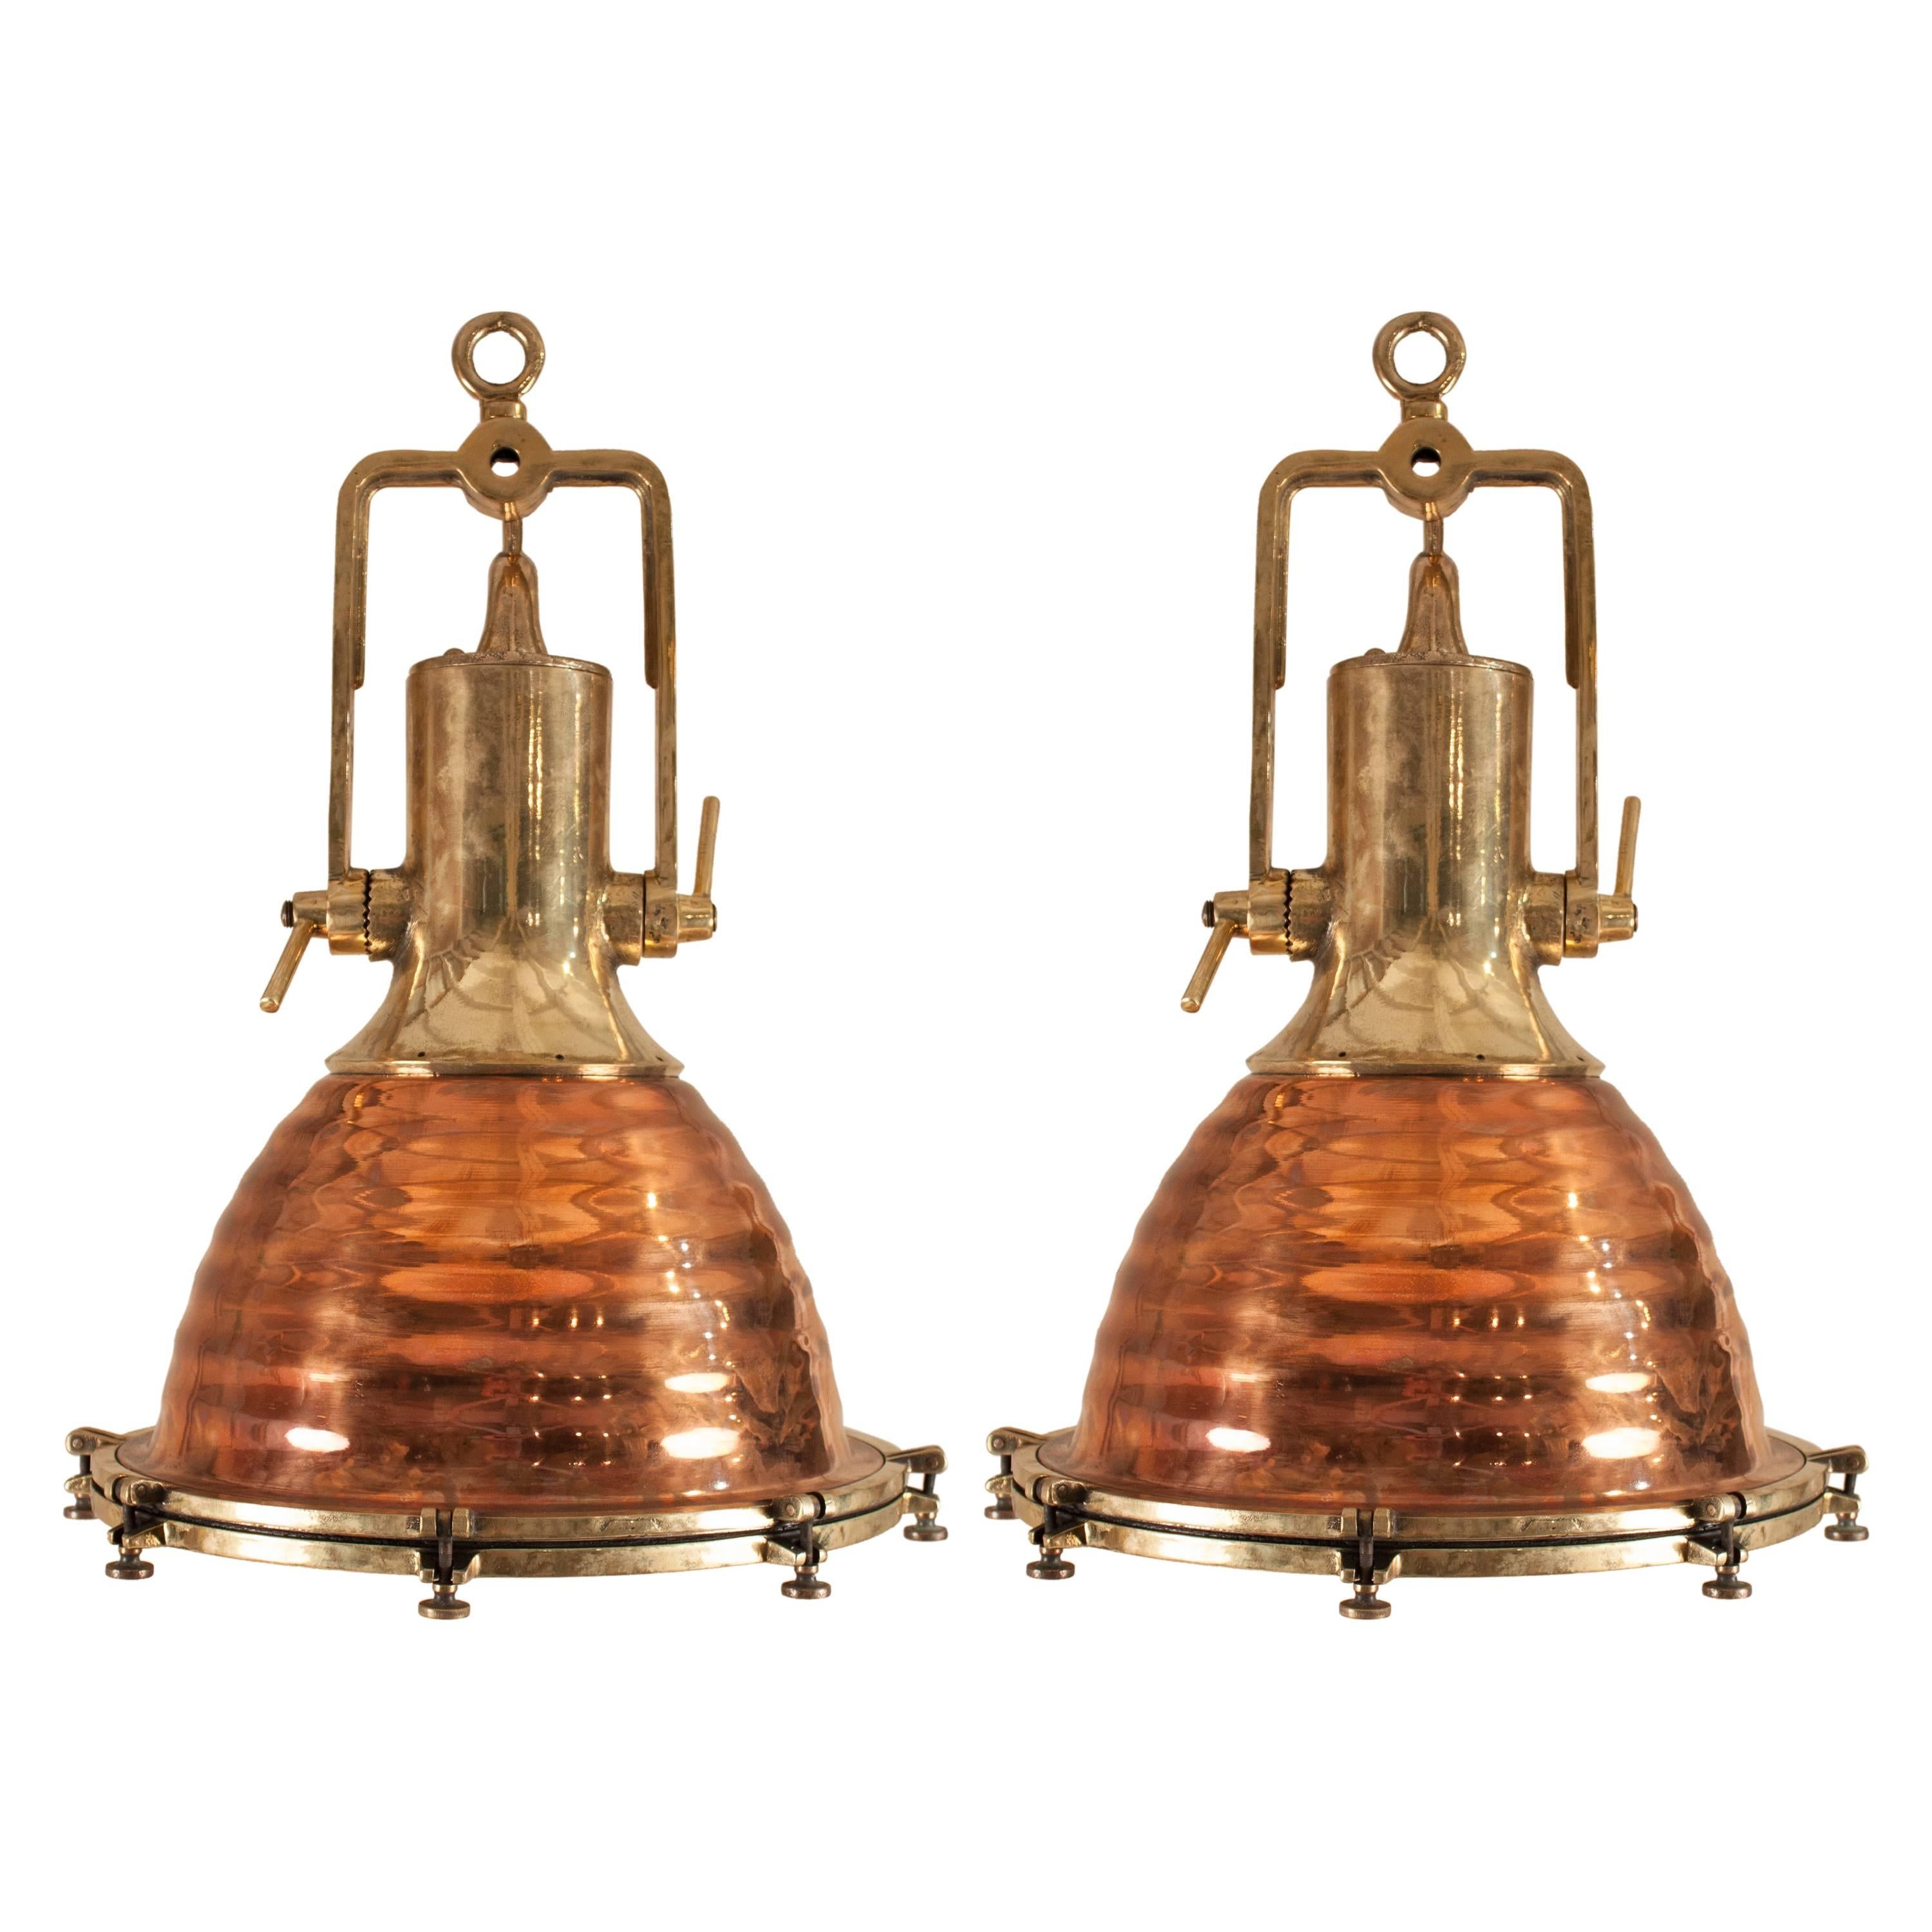 Pair of Large Copper and Brass Nautical Ship Deck Lights